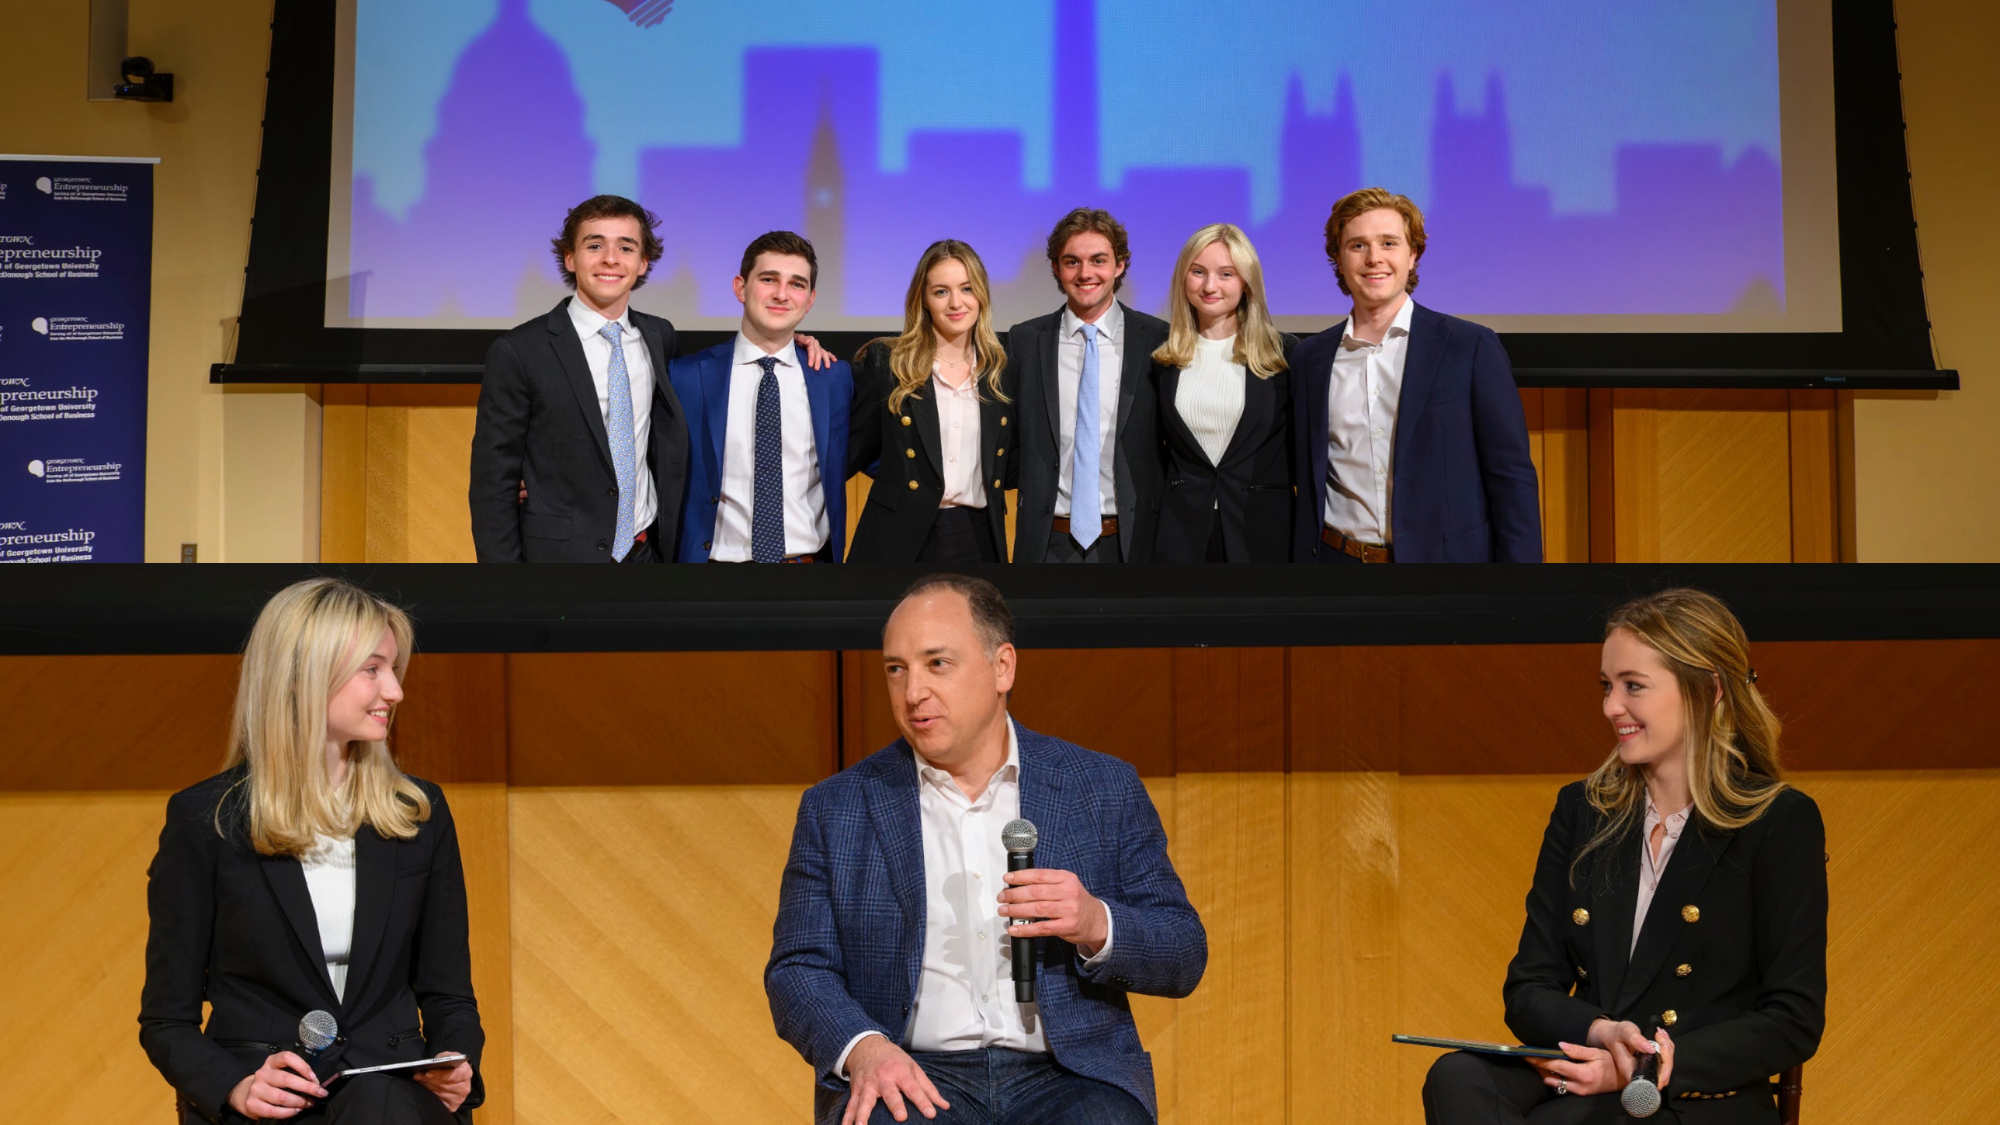 Georgetown McDonough undergraduate students Phoebe Martin (B'24) and Devon Pasieka (B'25) convened renowned leaders at the intersection of venture capital, entrepreneurship, and public policy for the first student-led Venture in the Capital Summit this past March.